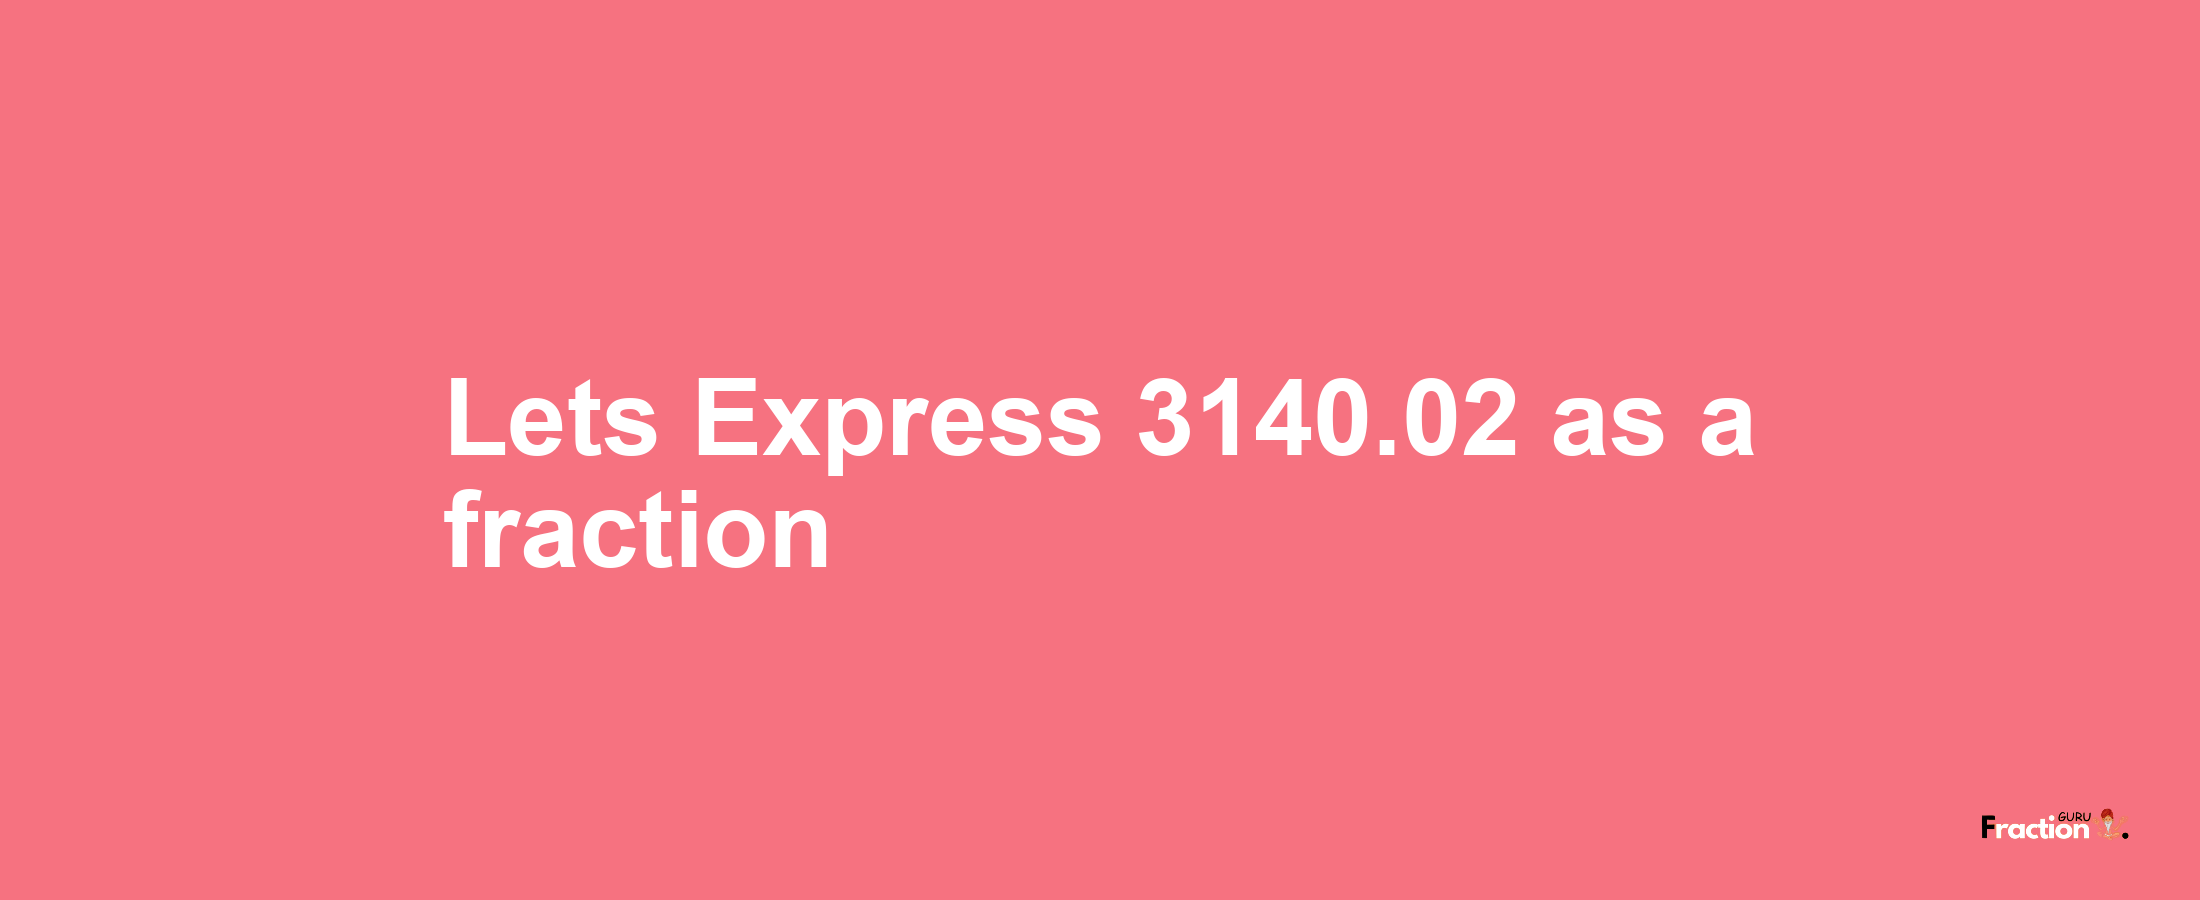 Lets Express 3140.02 as afraction